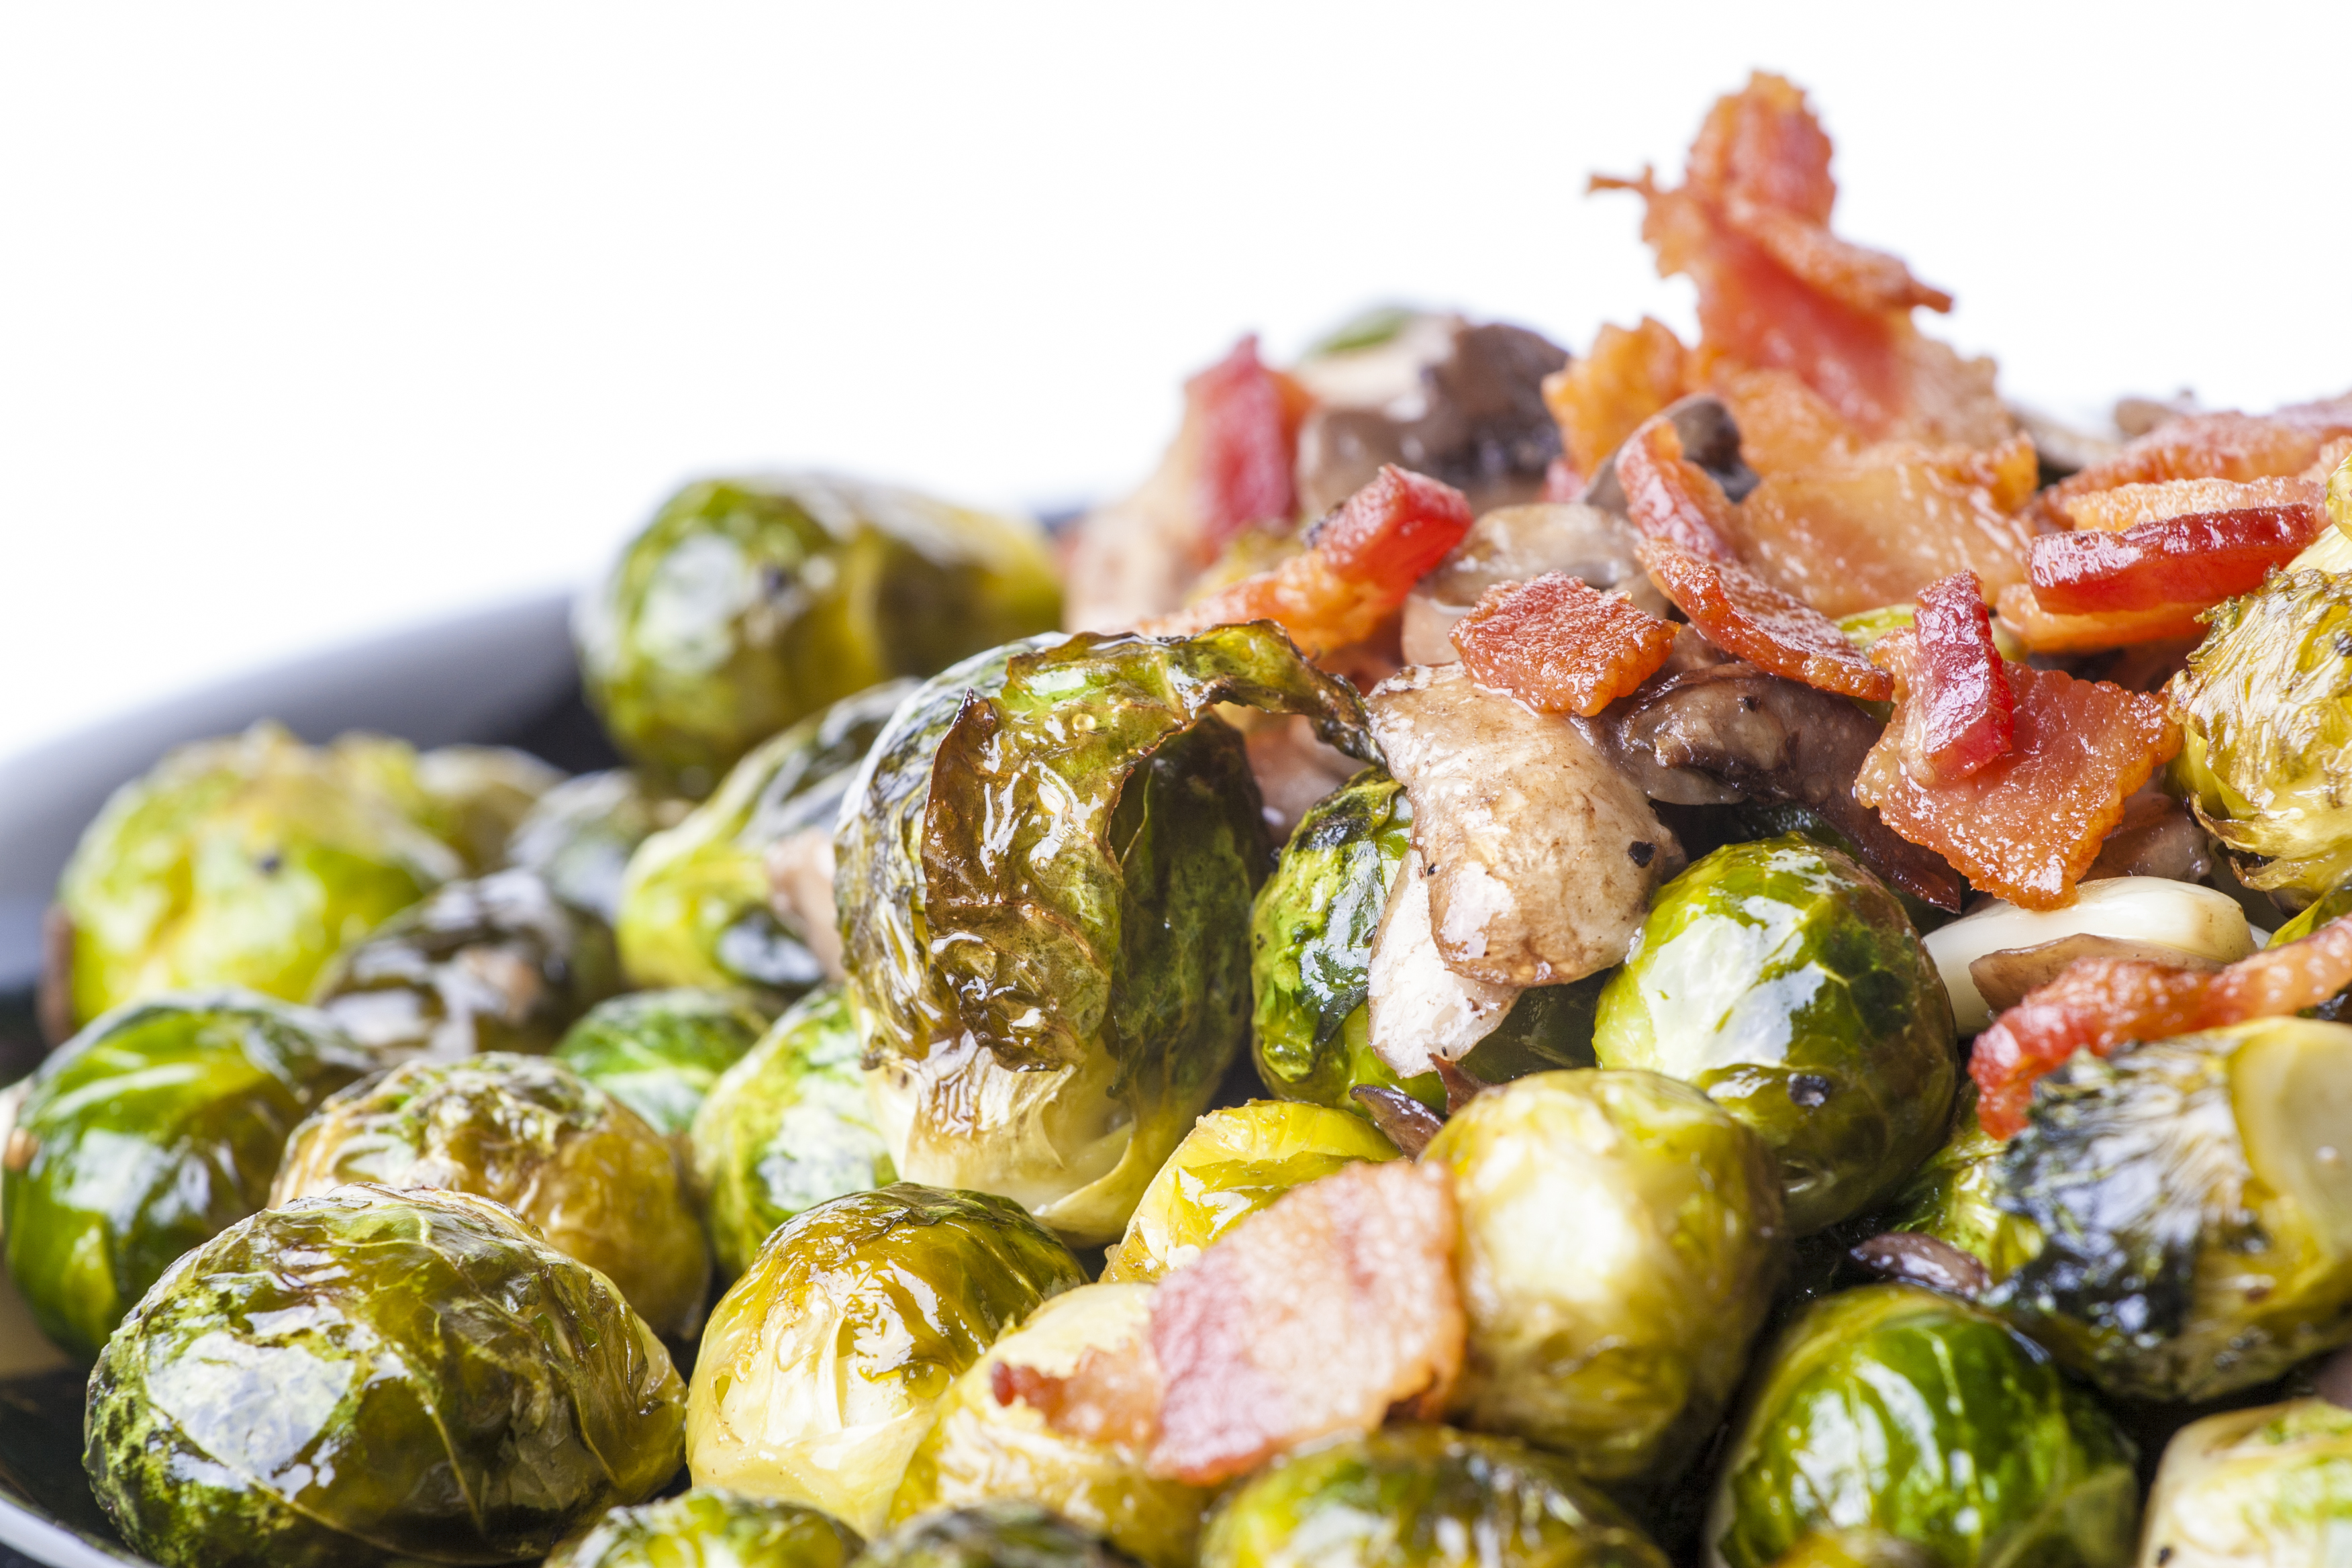 Roasted Brussel Sprouts With Bacon